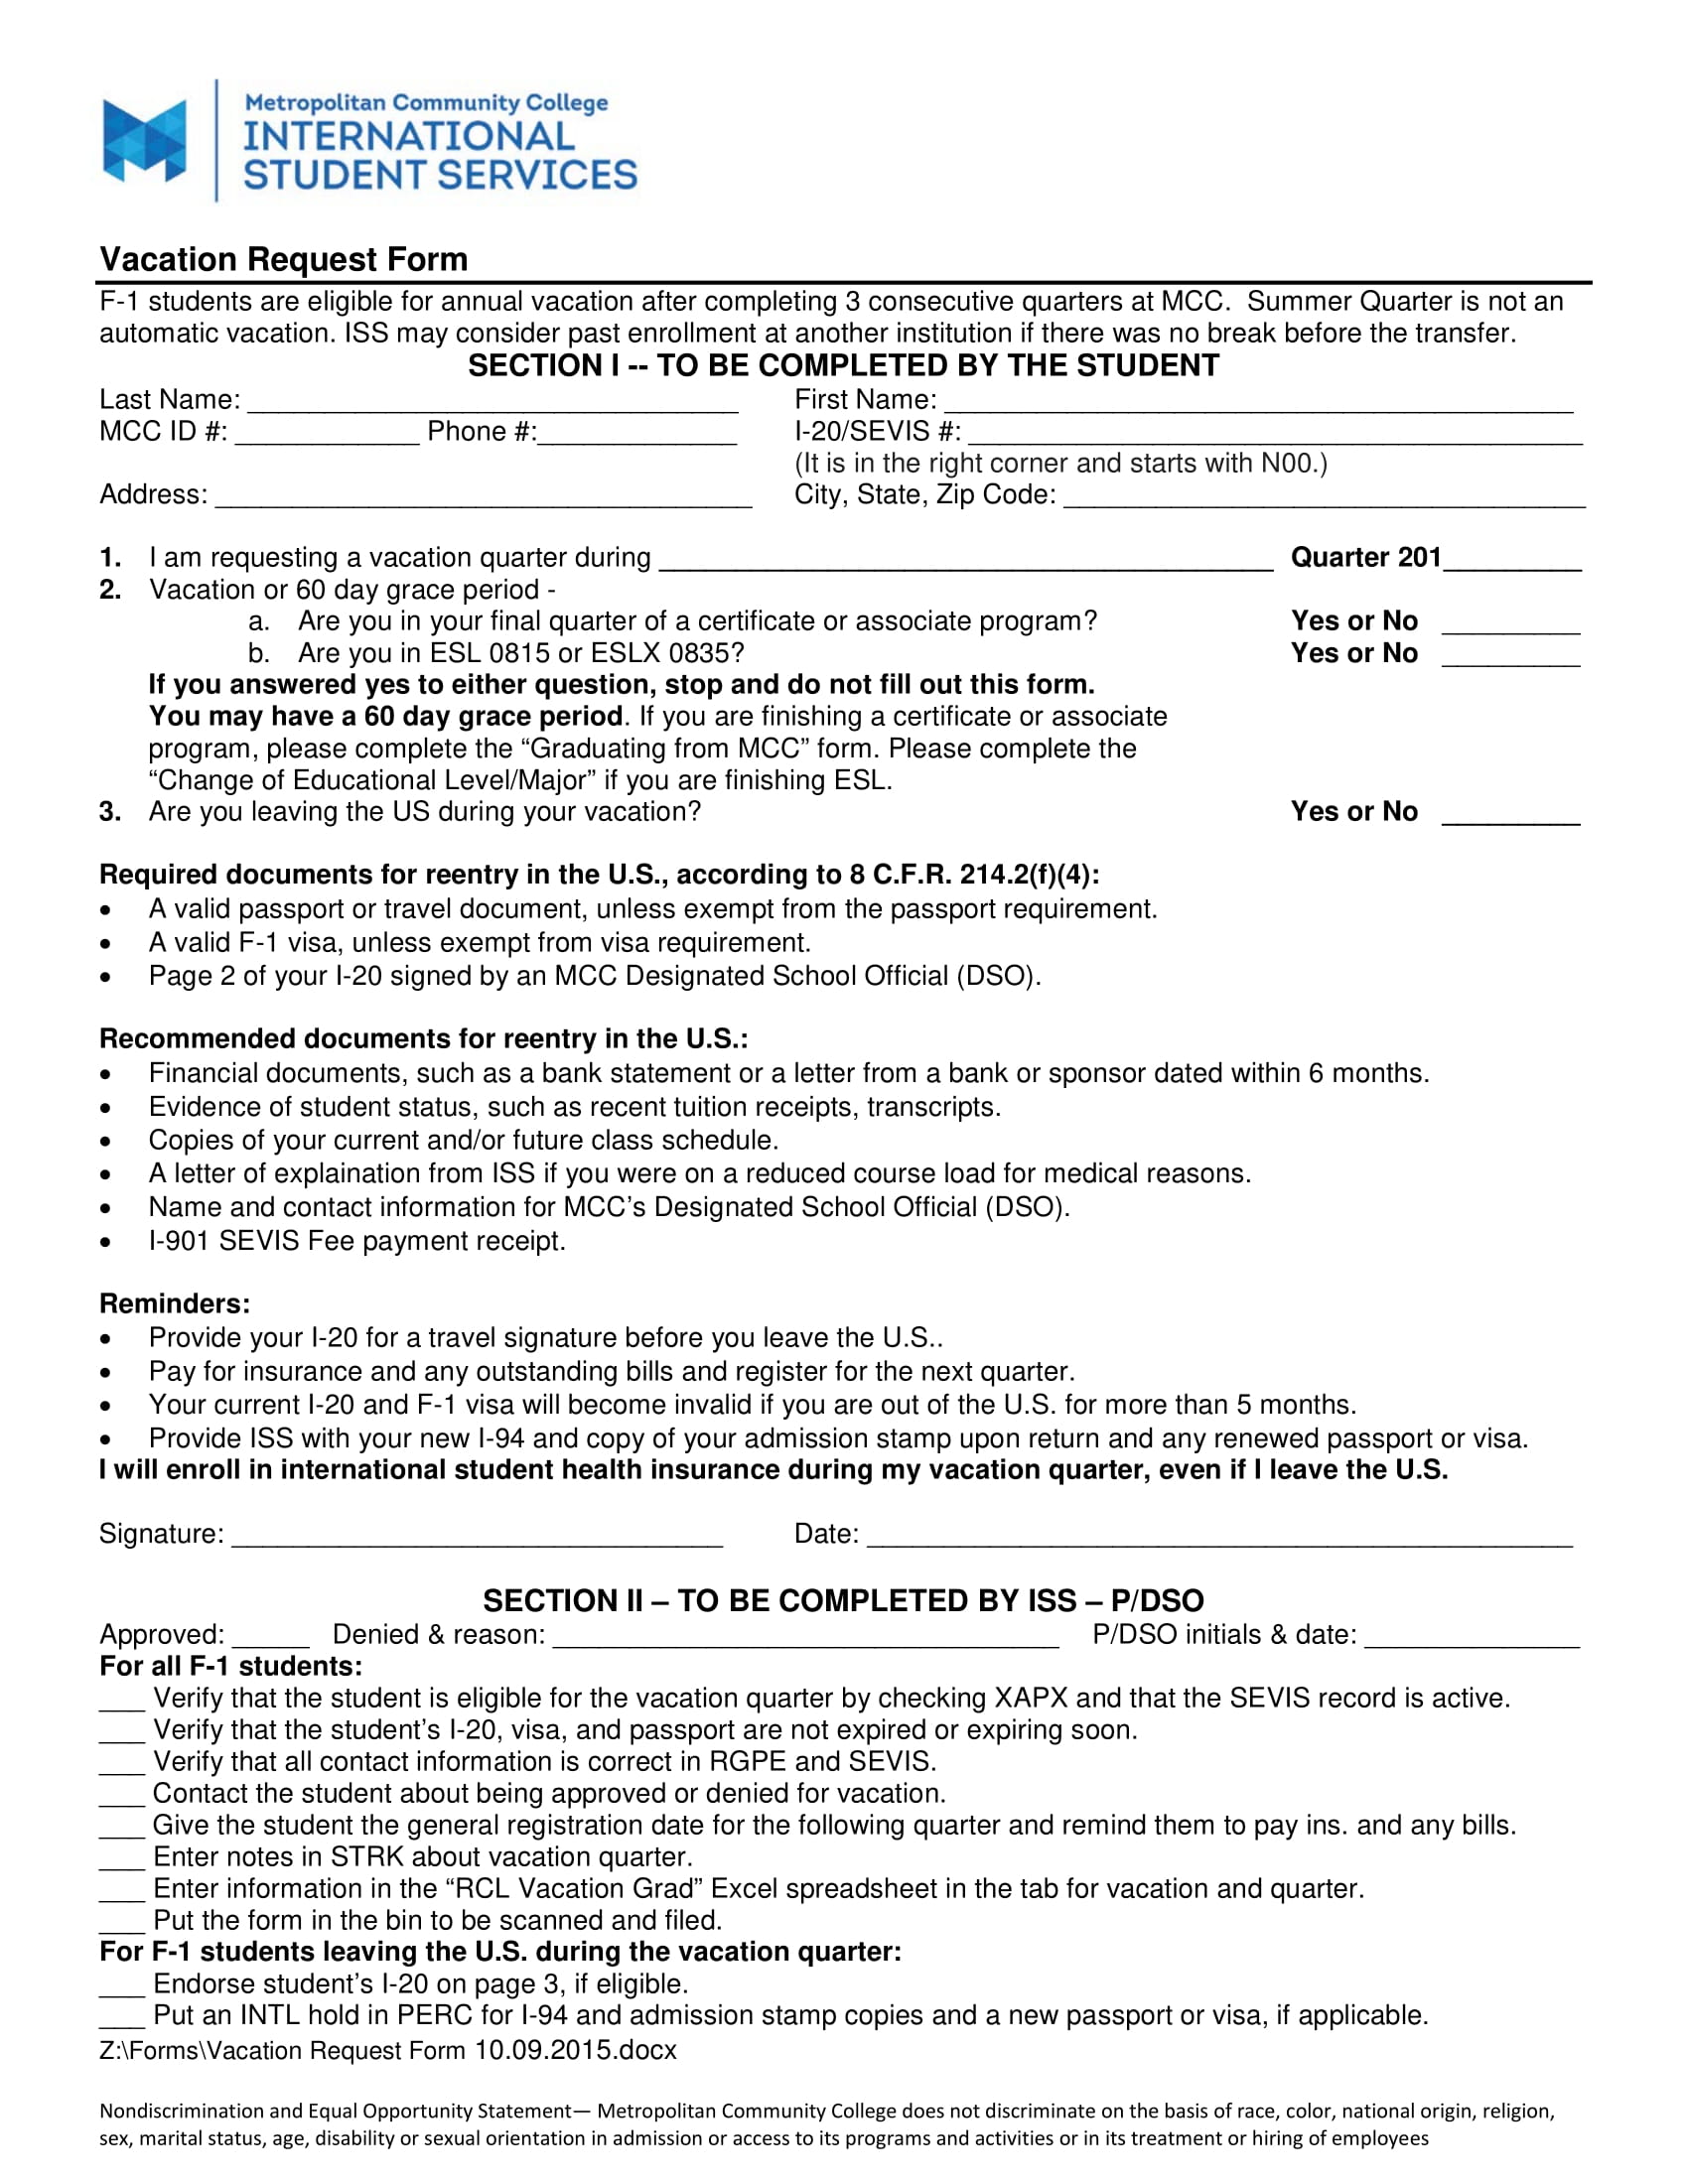 sample of a vacation request form